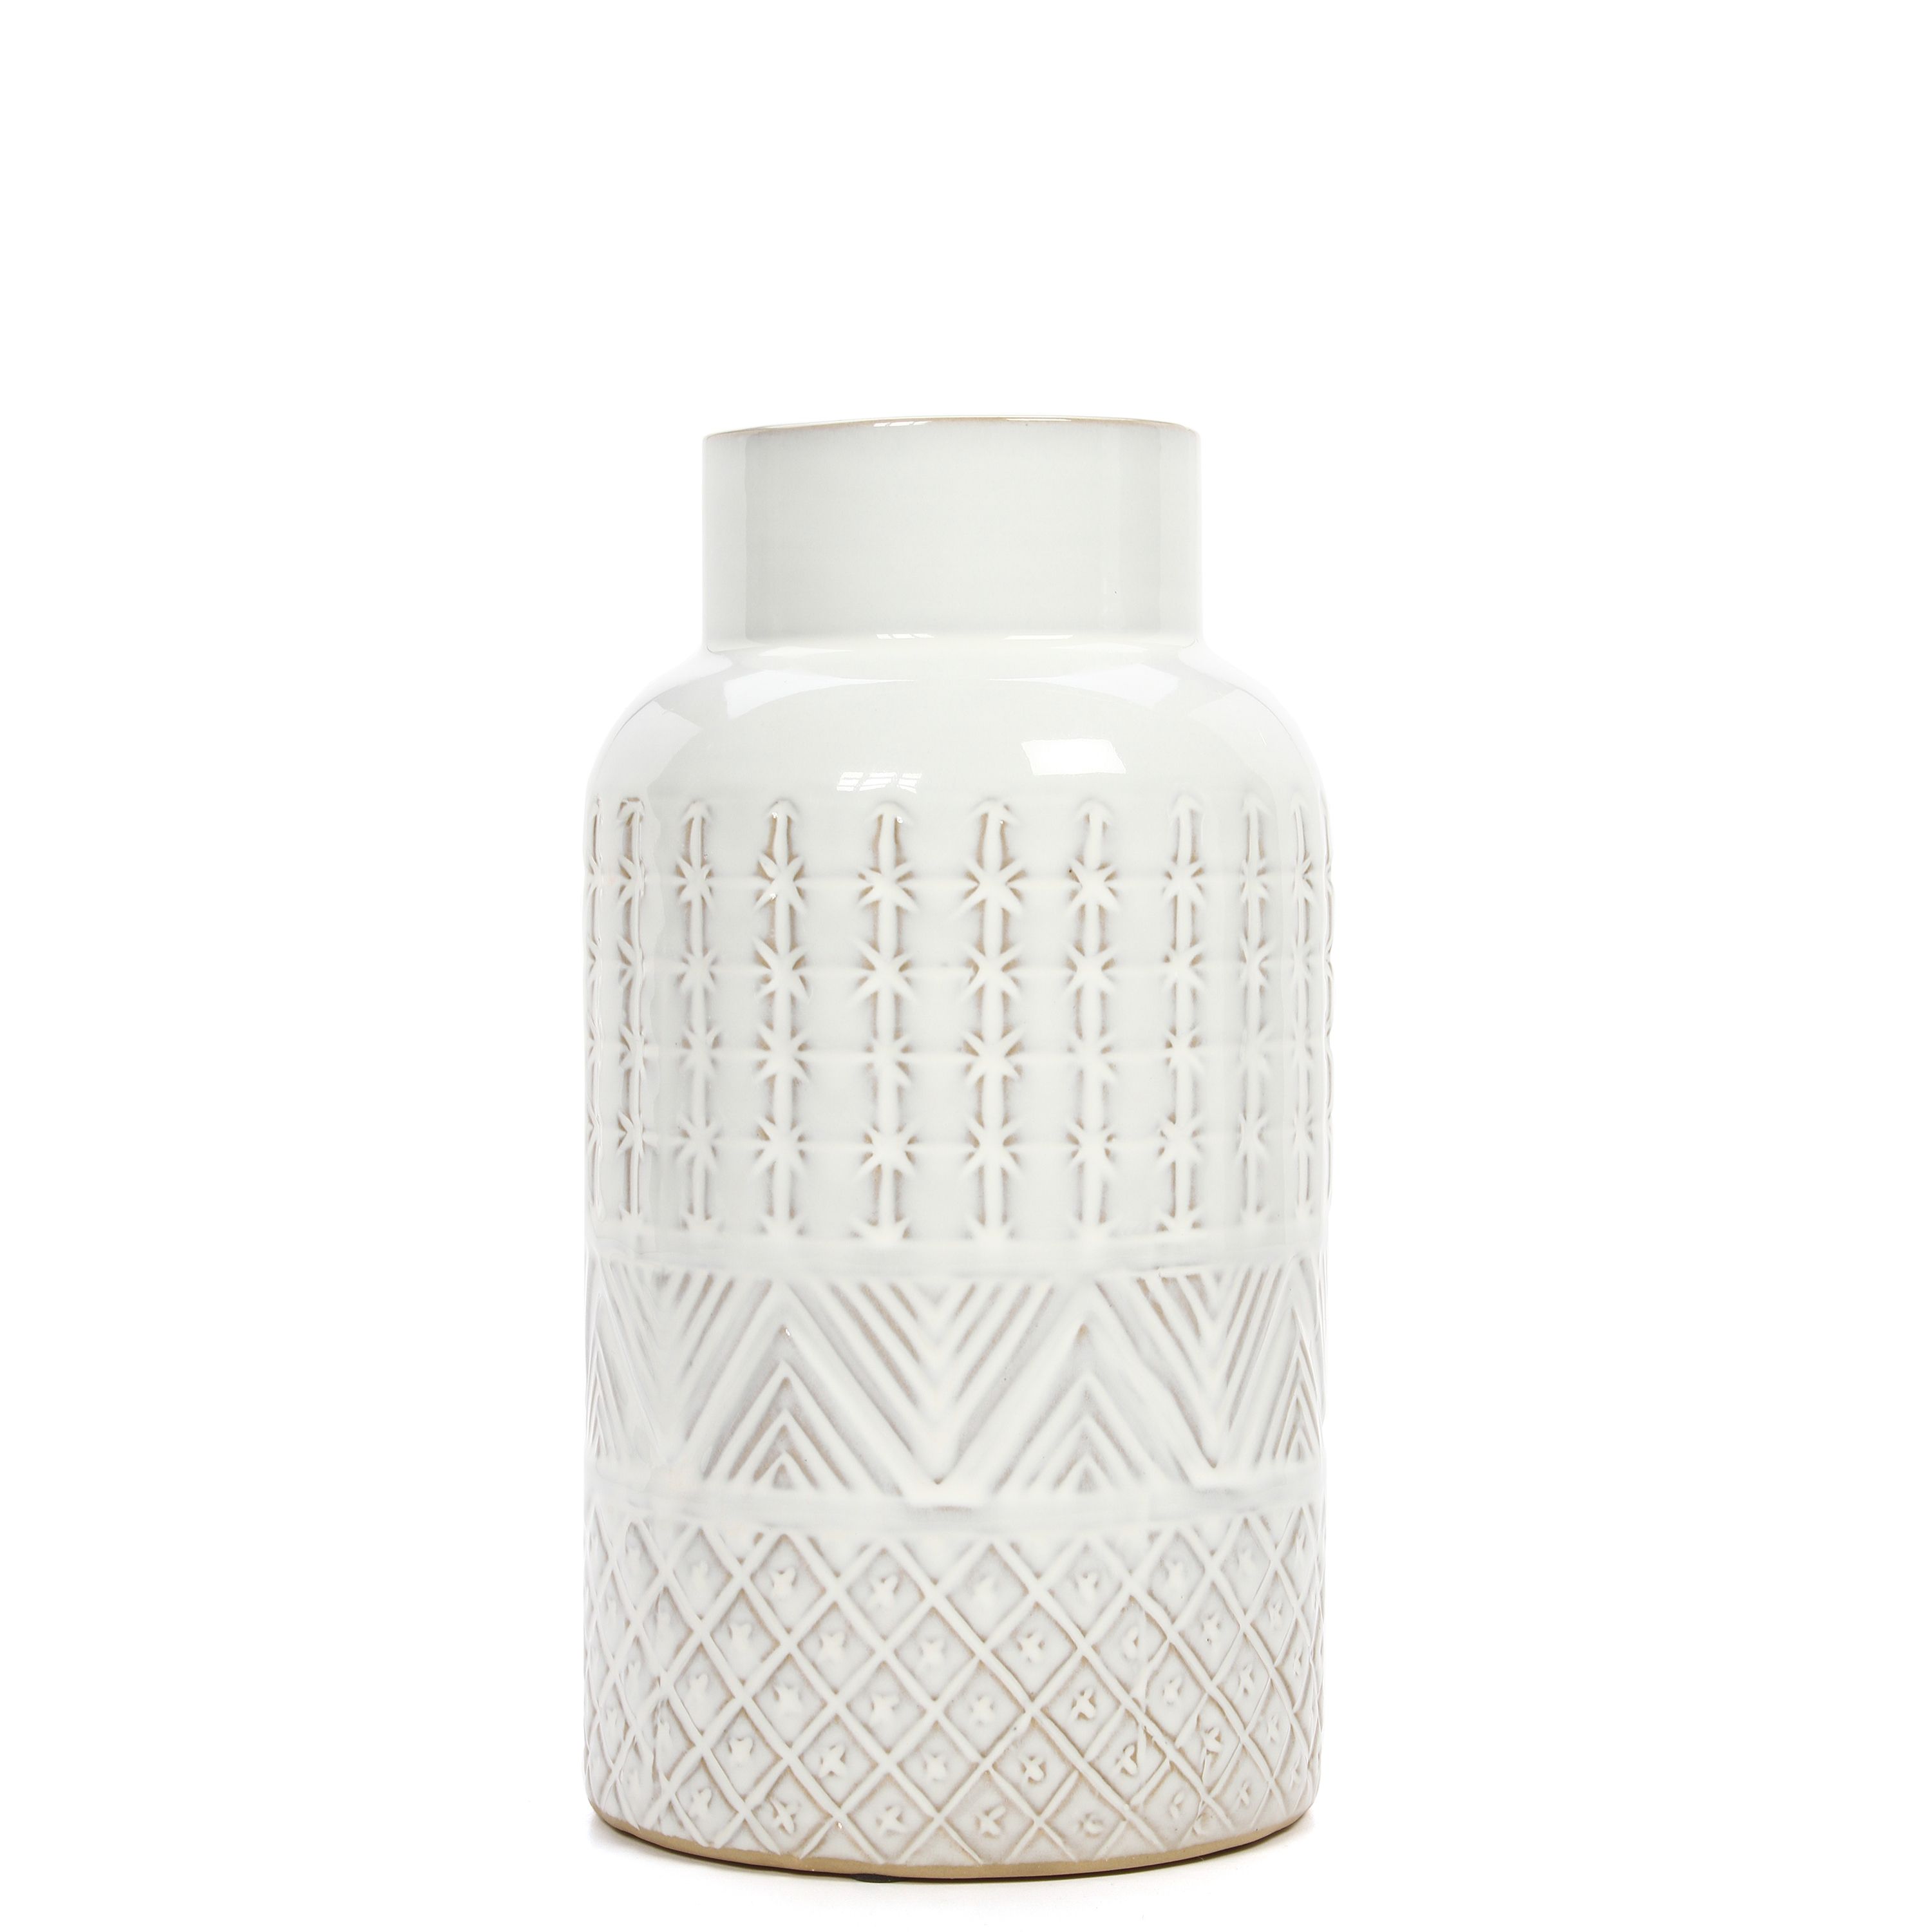 Better Homes and Gardens Large Cream Textured Vase | Walmart (US)